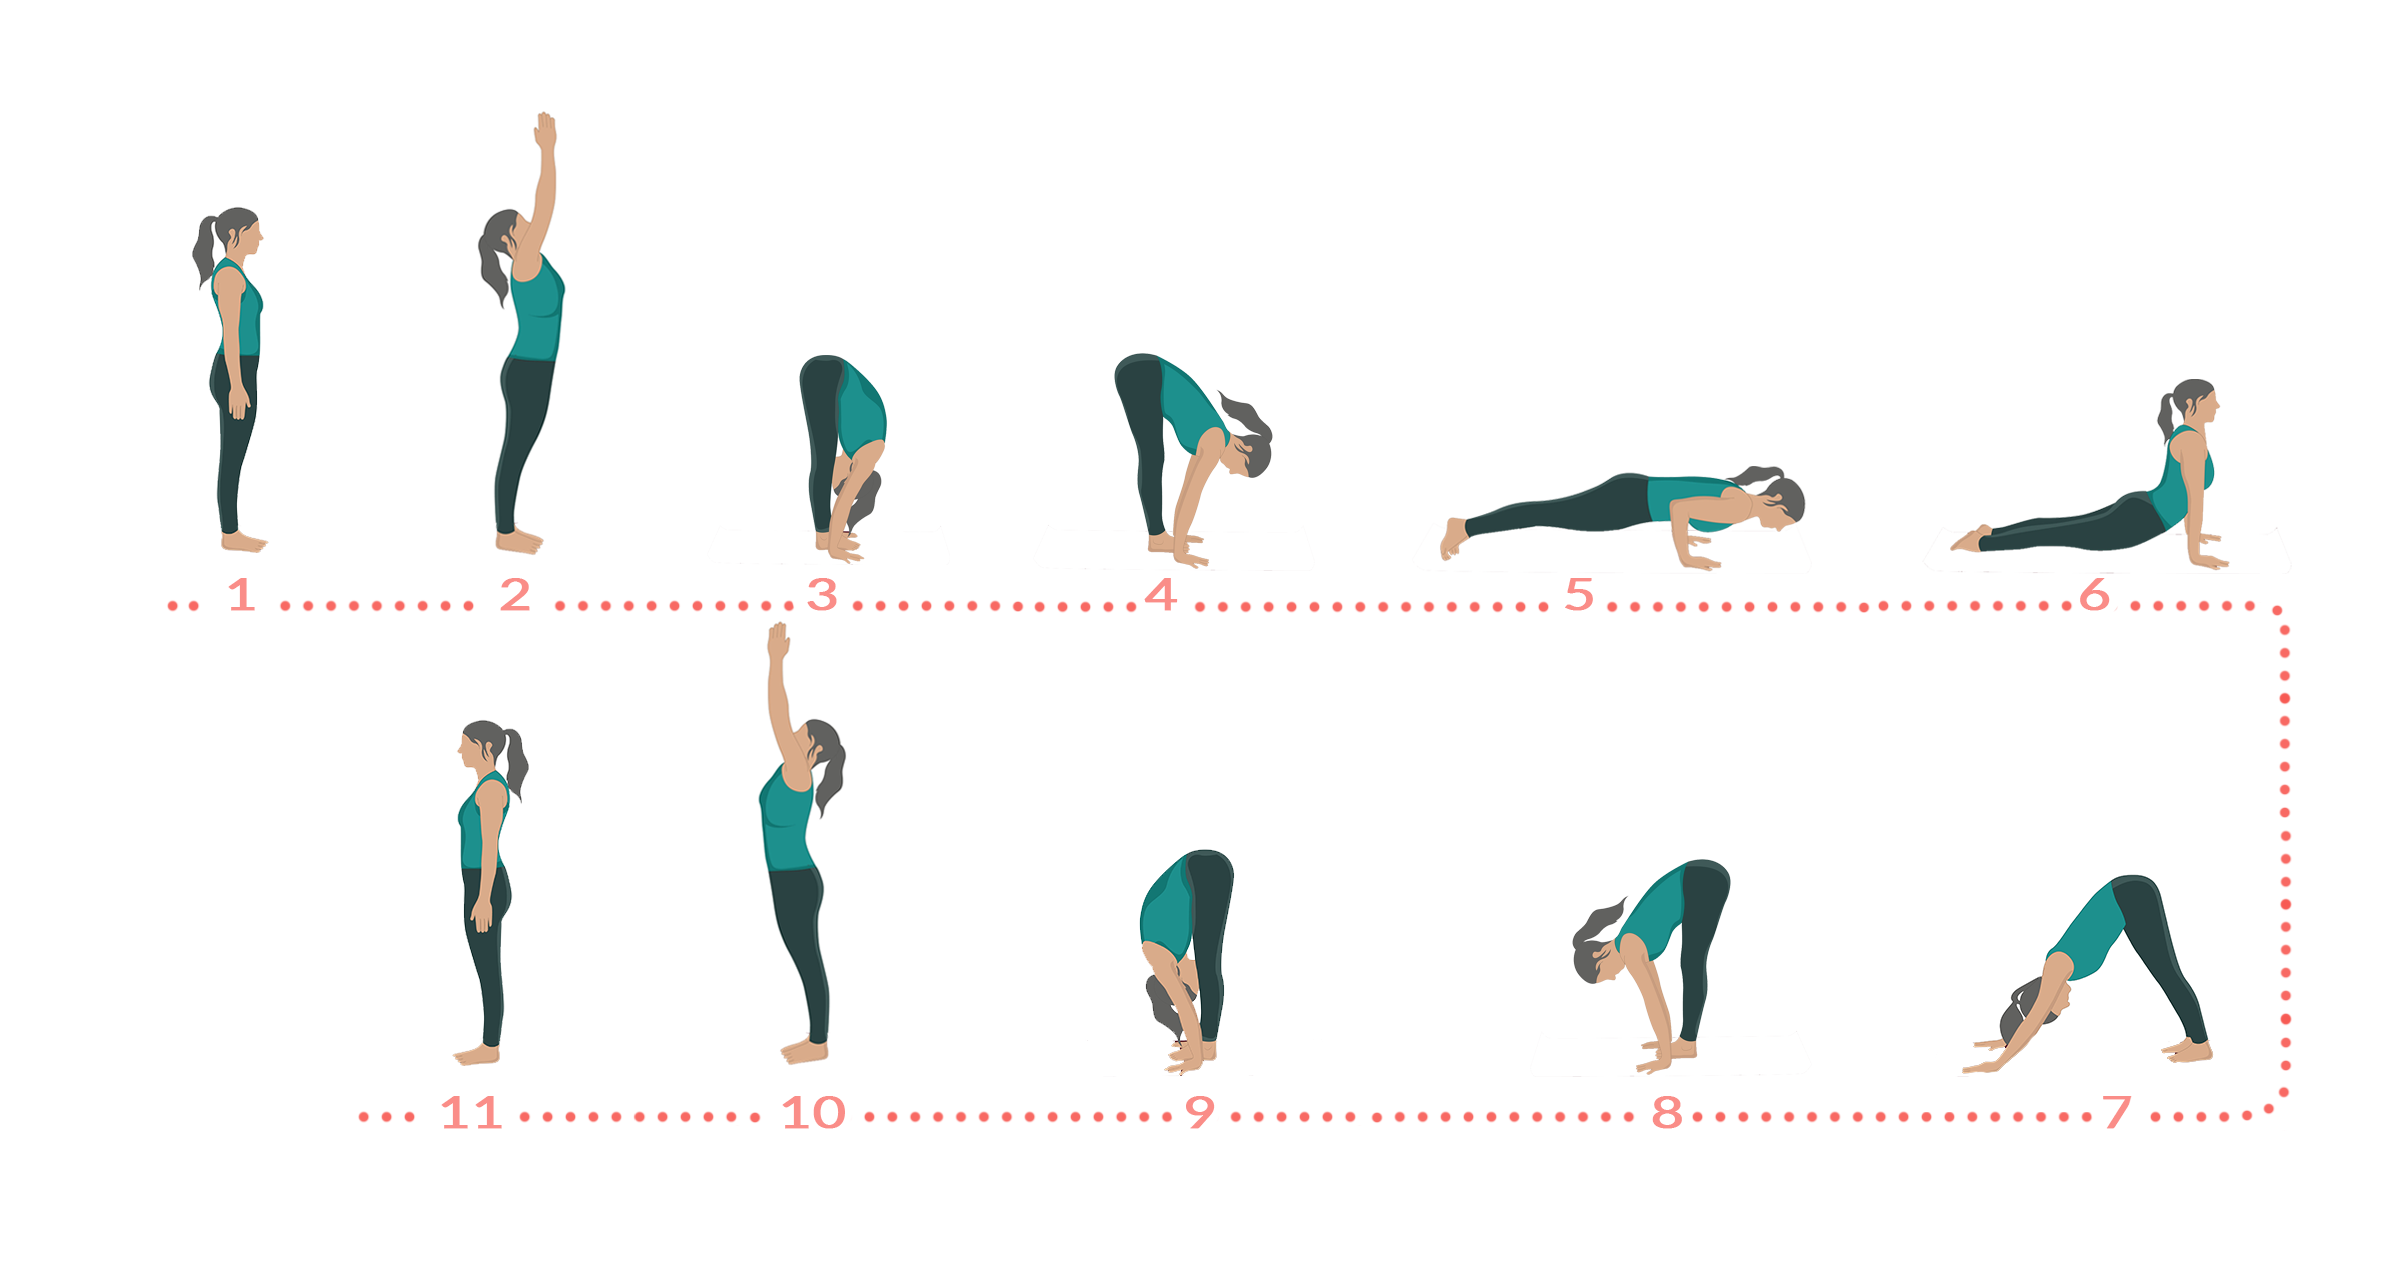 20 Best Yoga Poses For Beginners - Basic Yoga Moves To Know